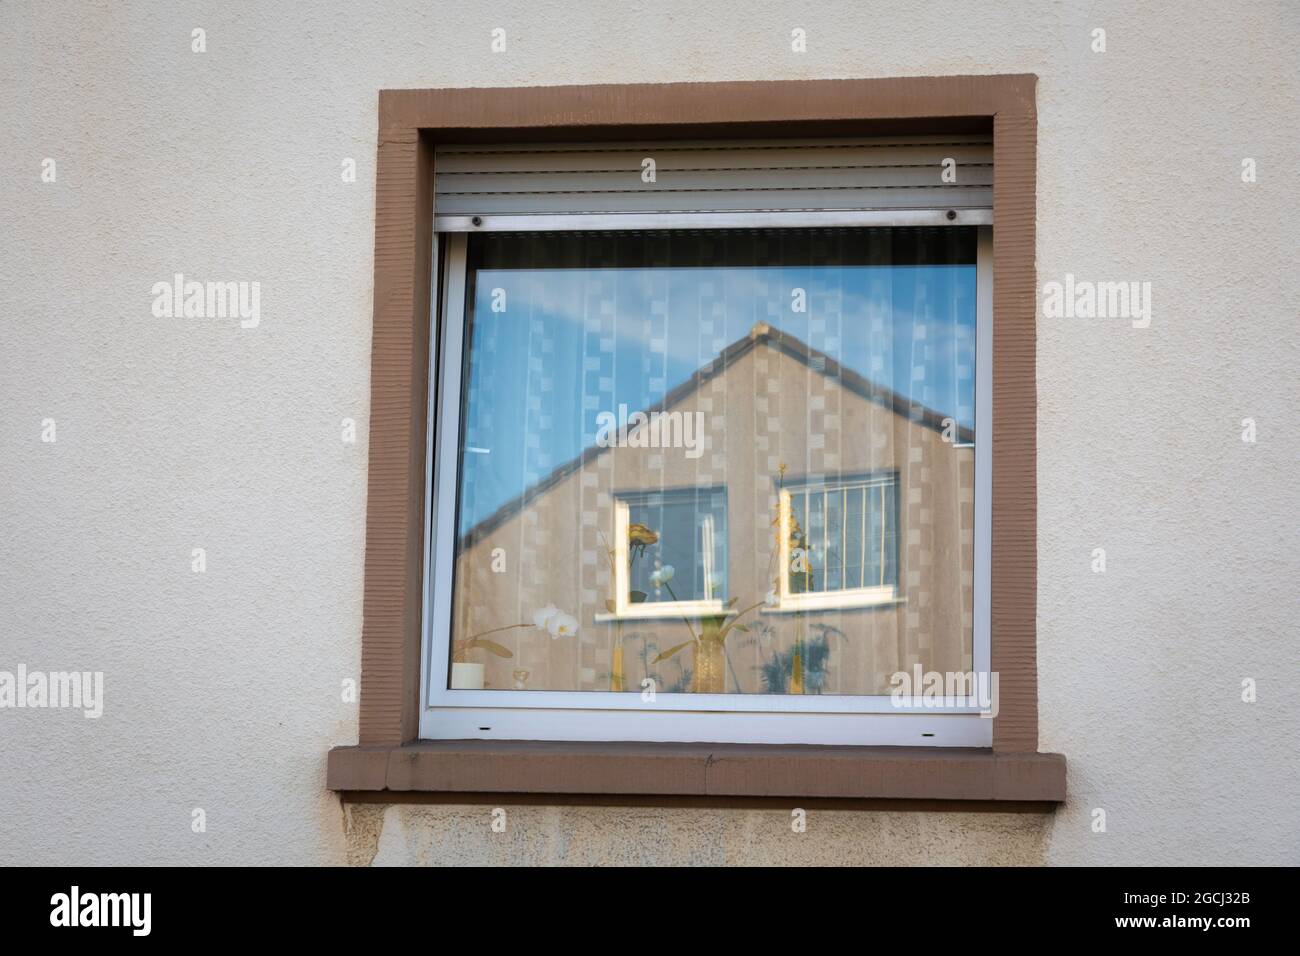 Characteristic worker's housing estate Stock Photo